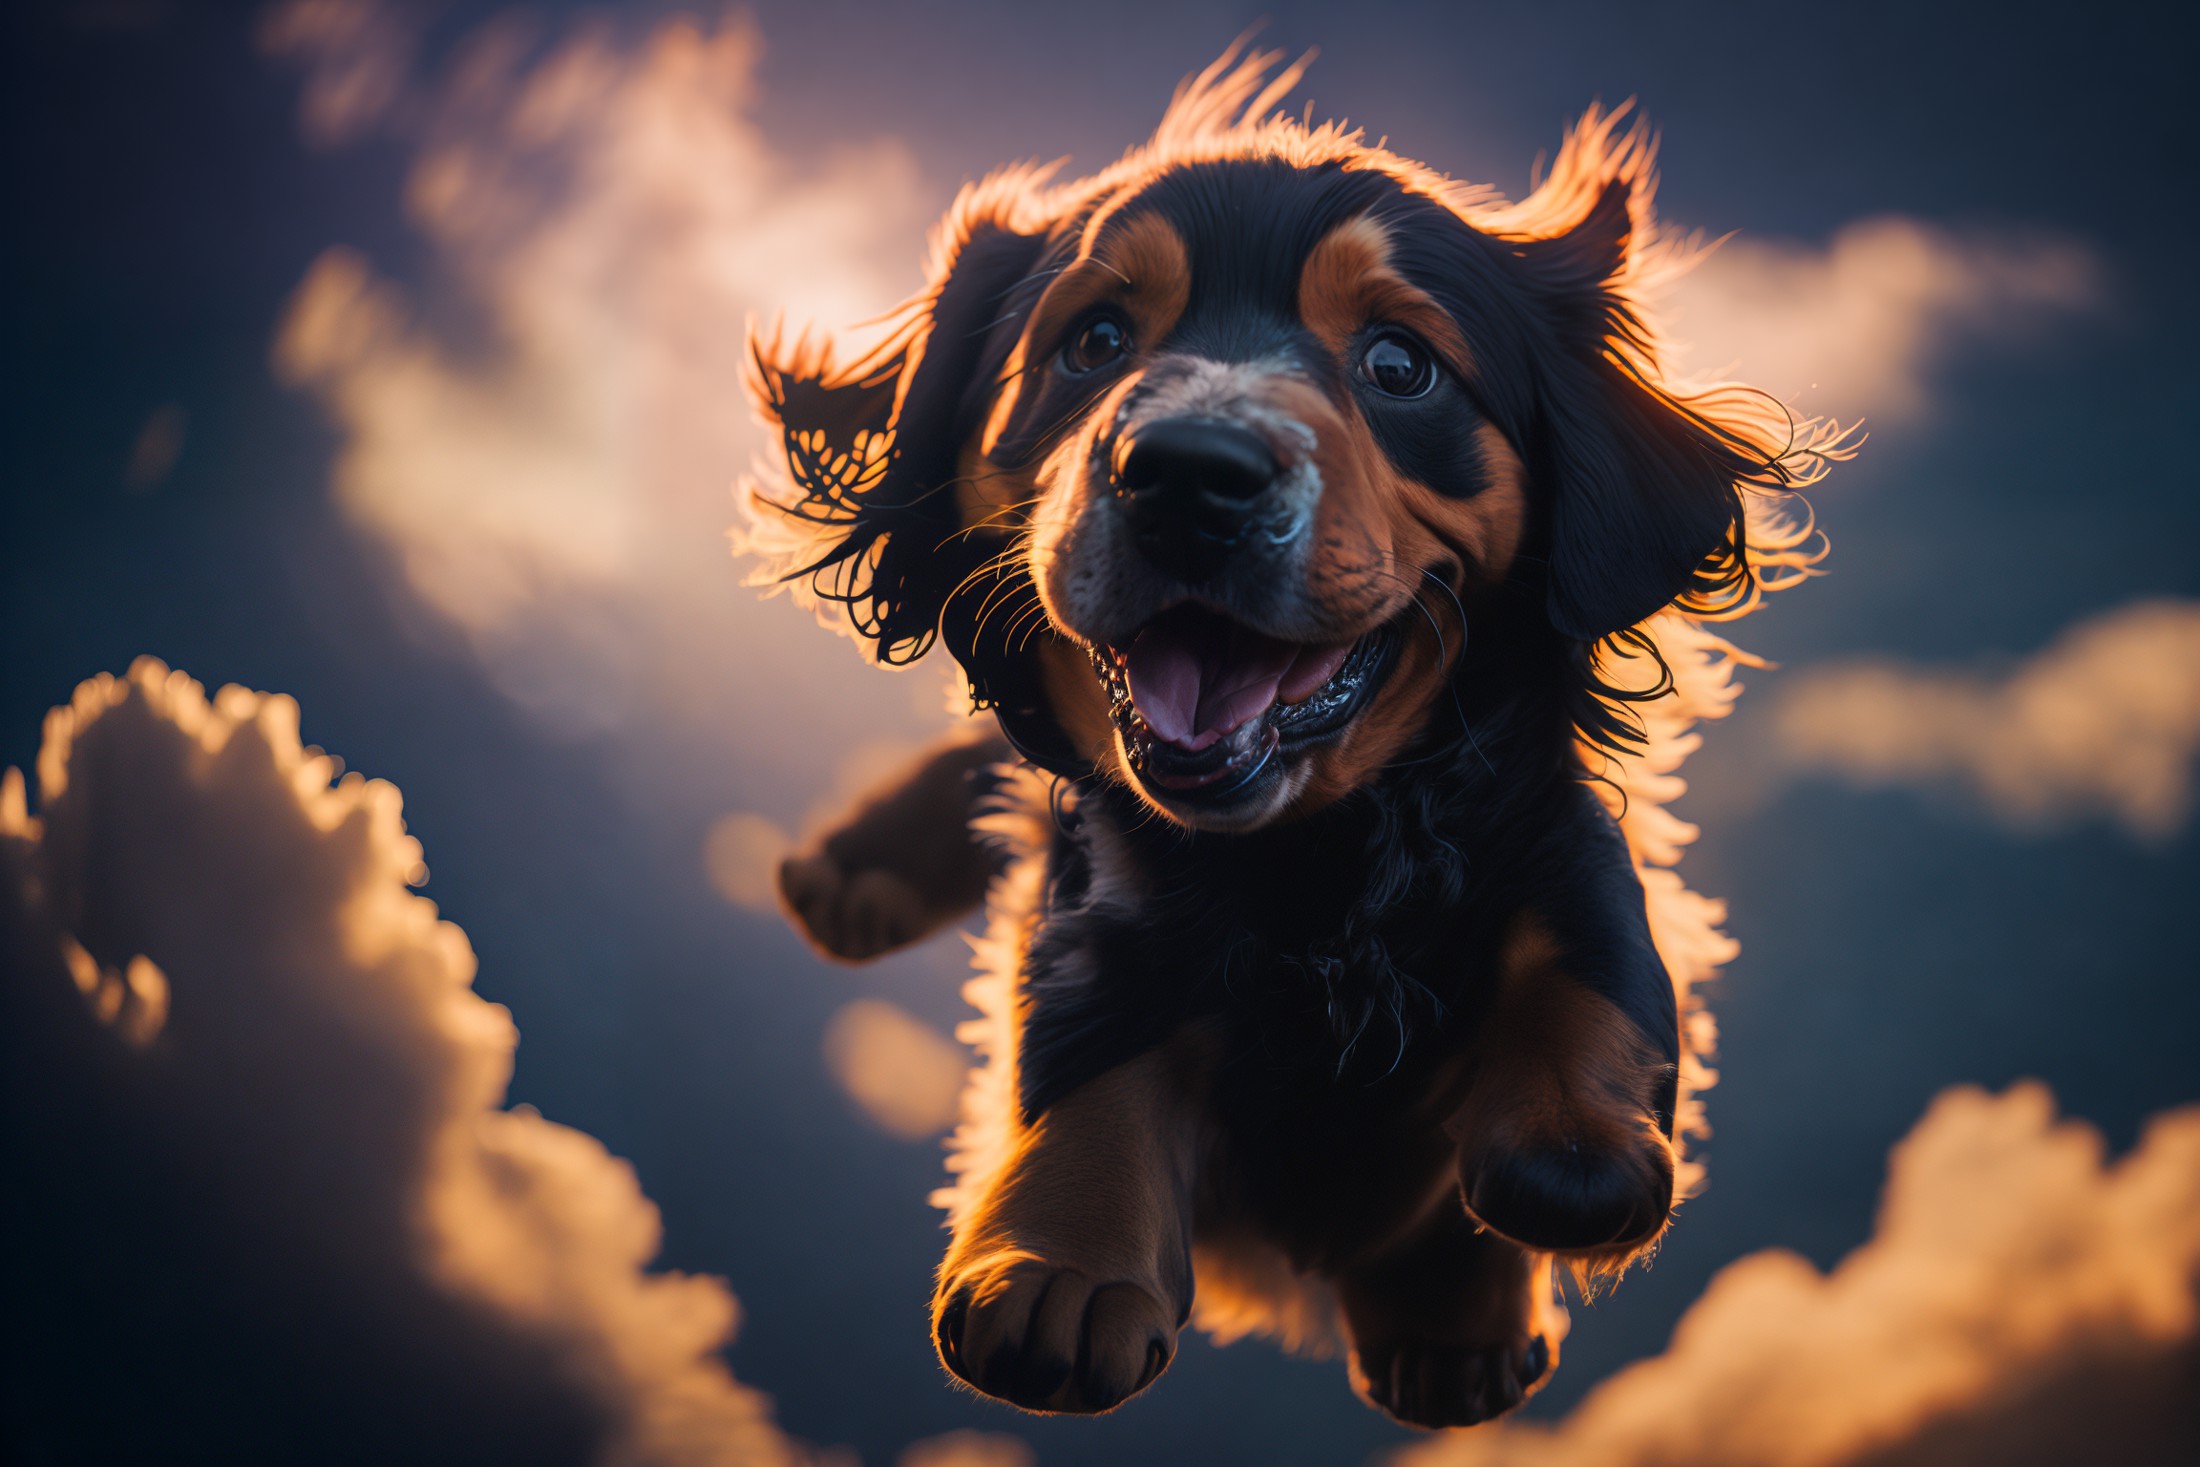 award winning portrait of a flying happy puppy in the clouds, bokeh, backlit